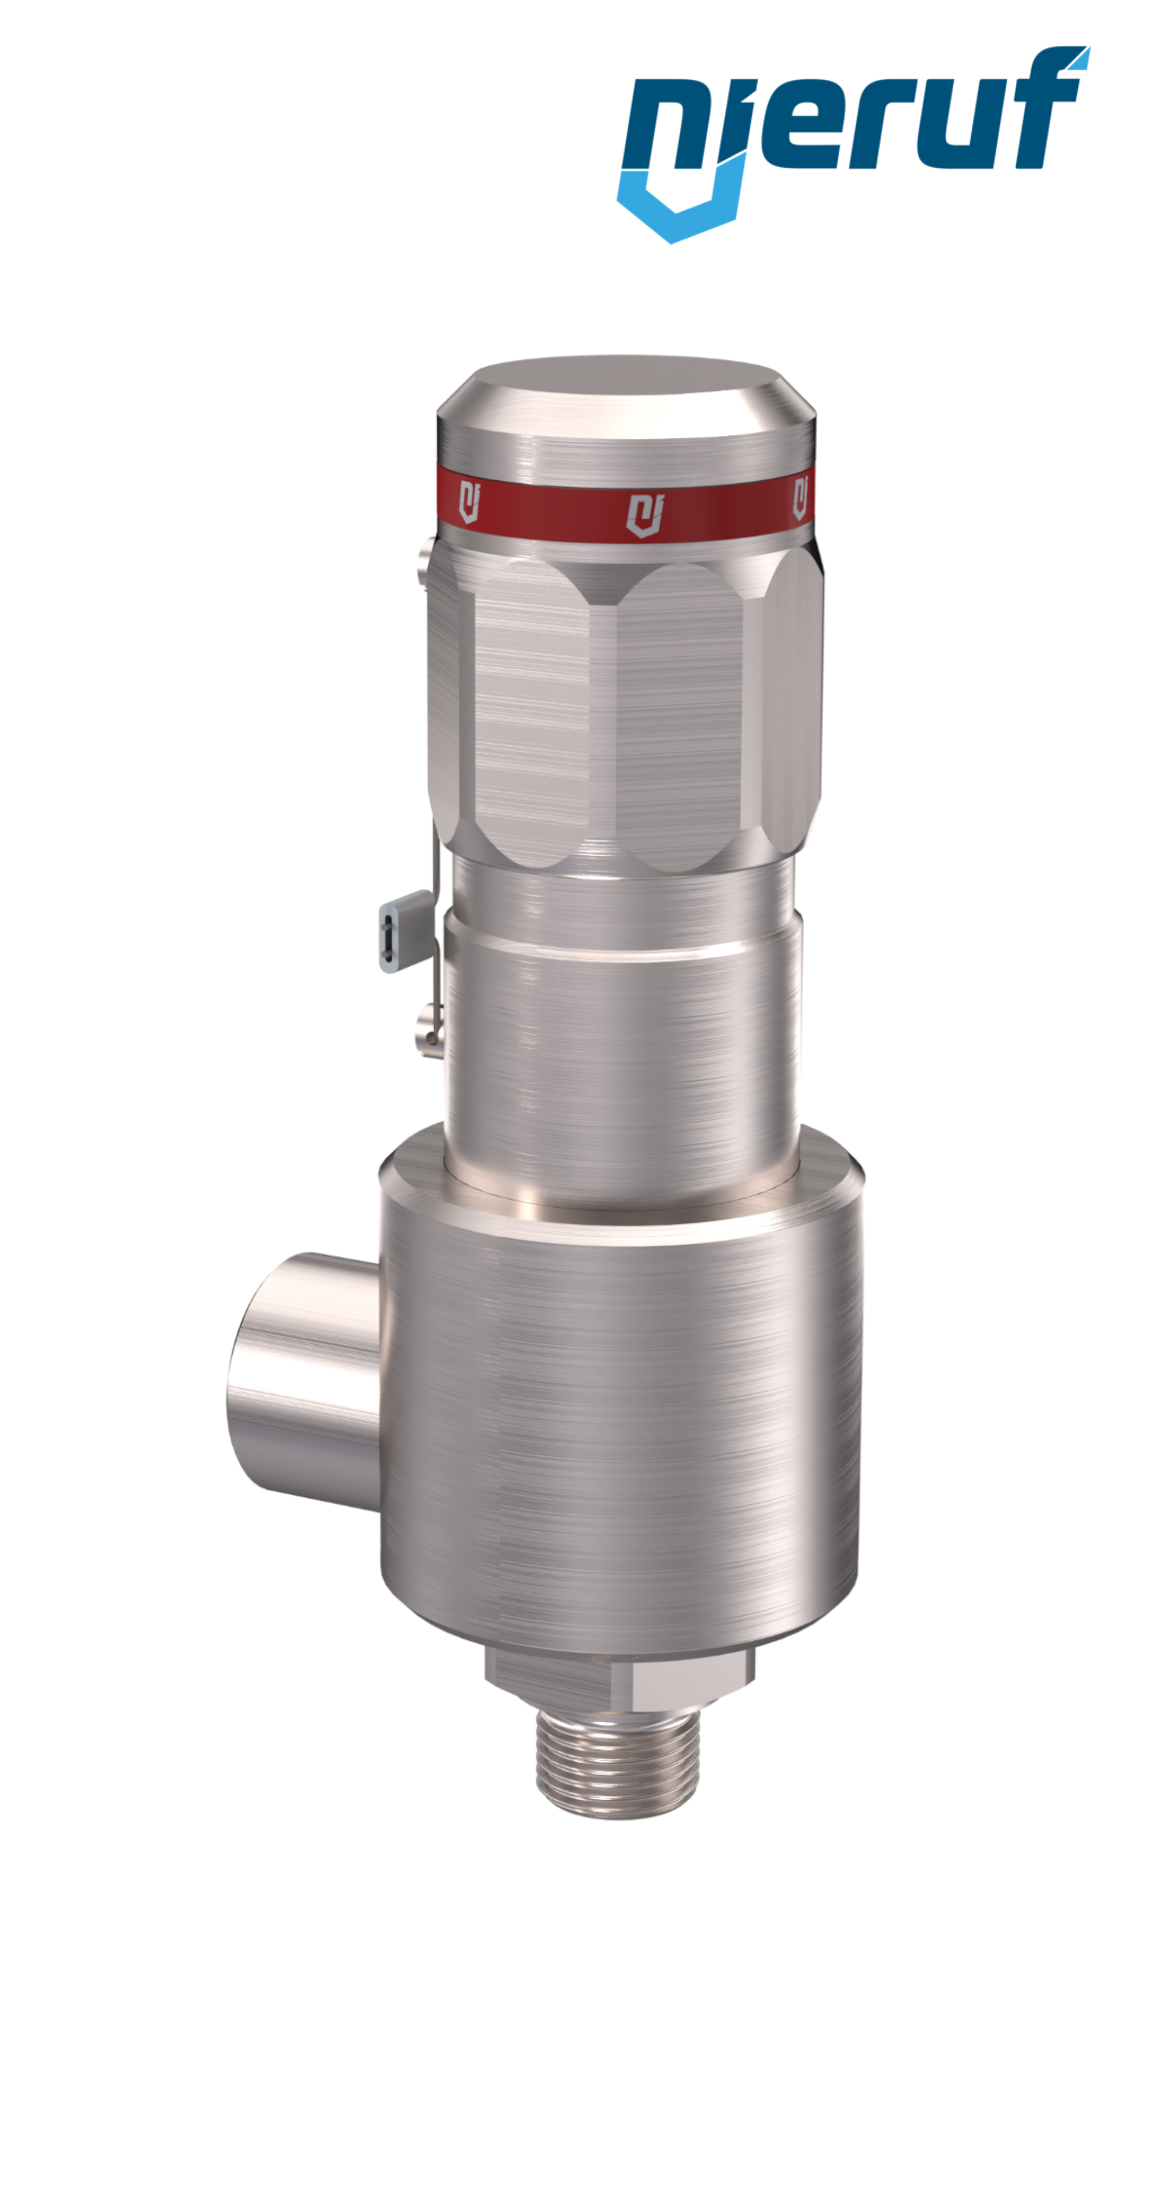 High-pressure safety valve 1/2" m x 1/2" fm SV15, stainless steel MD / PAI, without lifting device